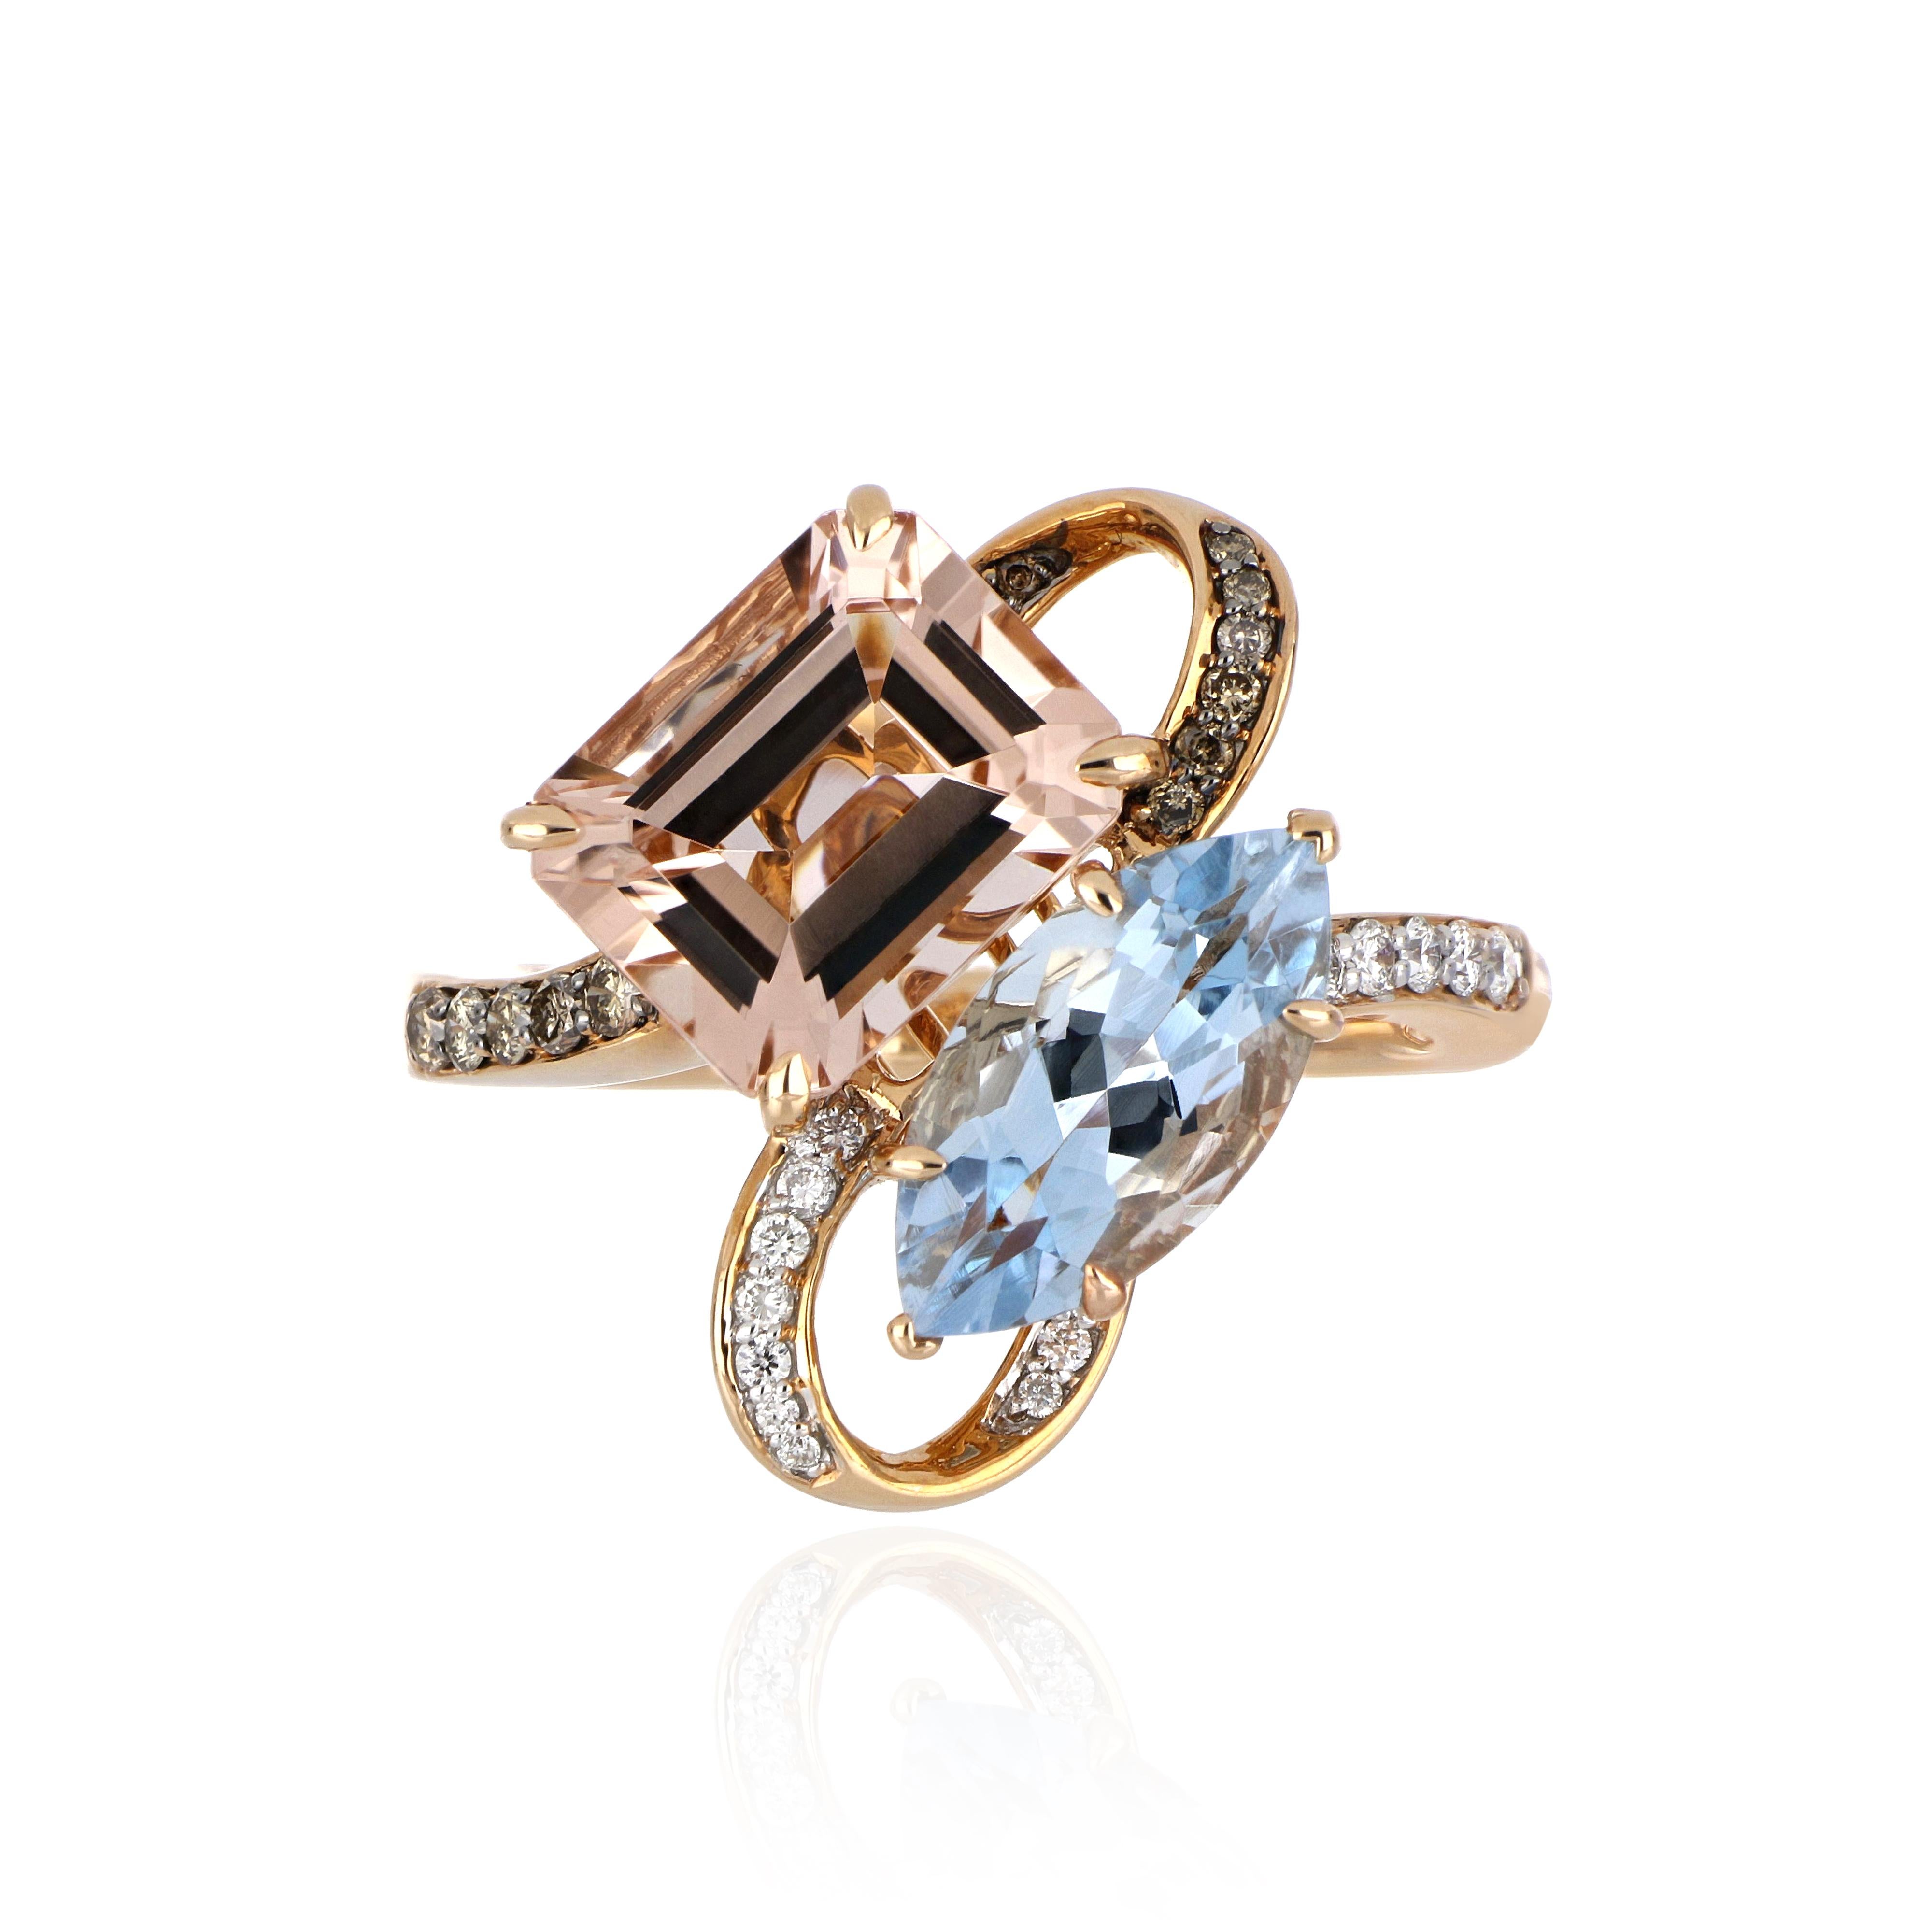 Elegant and exquisitely detailed Cocktail 18K Ring, centre set with 2.90 Ct Octagon Morganite and 1.64 Ct Marquise Aquamarine, surrounded by and enhanced on shank with micro pave white and chocolate Diamonds, weighing approx. 0.21 total carat